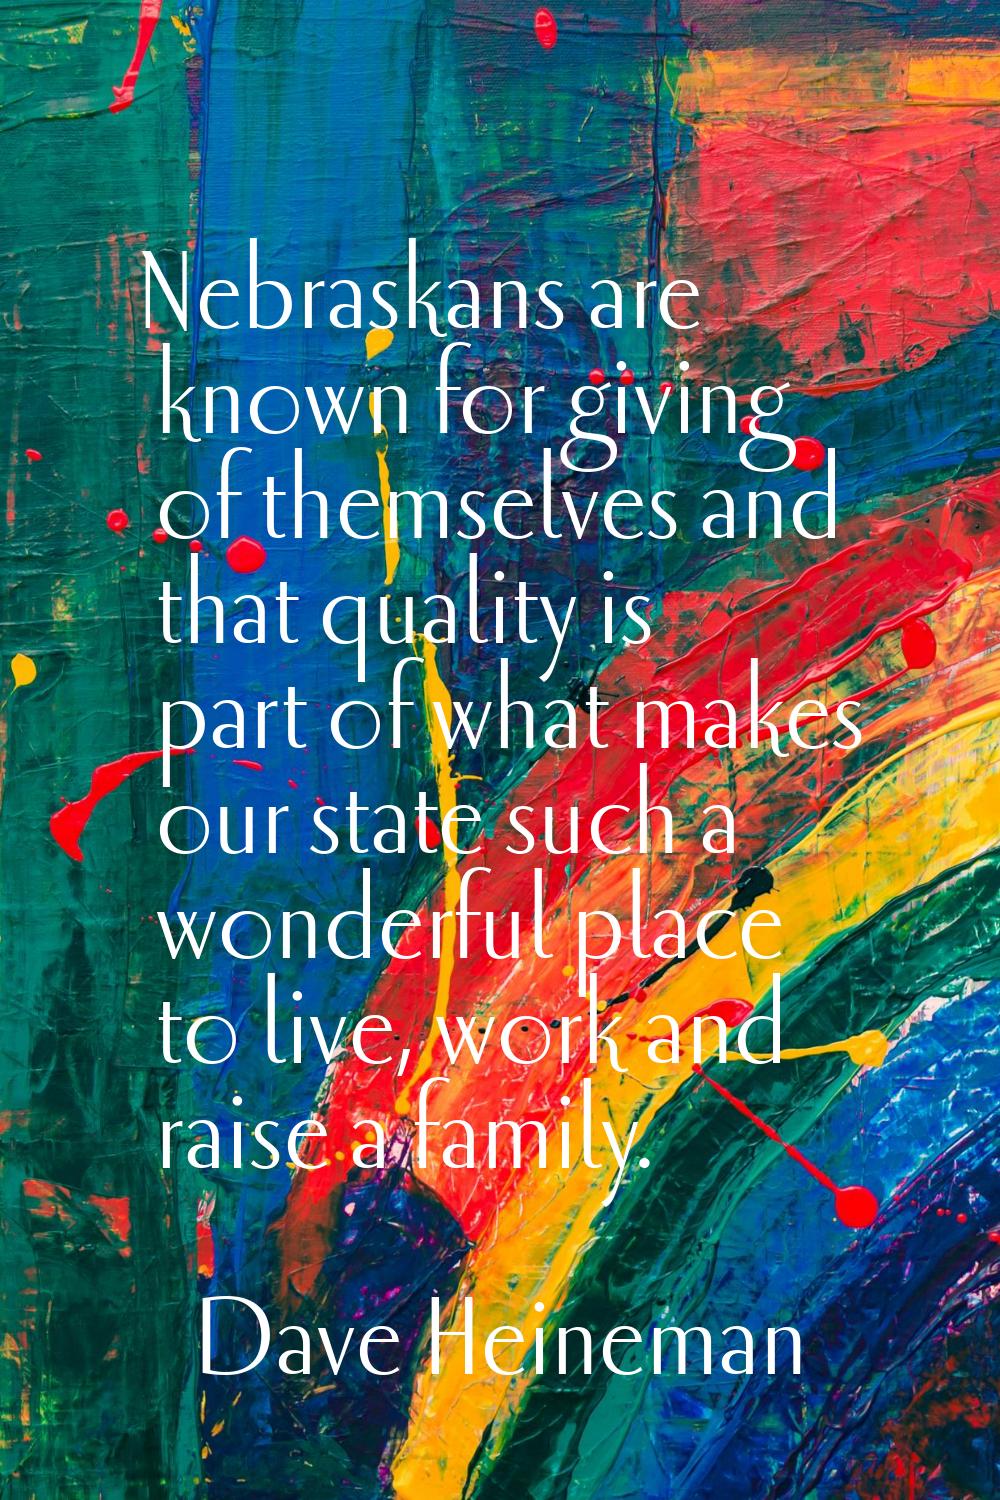 Nebraskans are known for giving of themselves and that quality is part of what makes our state such